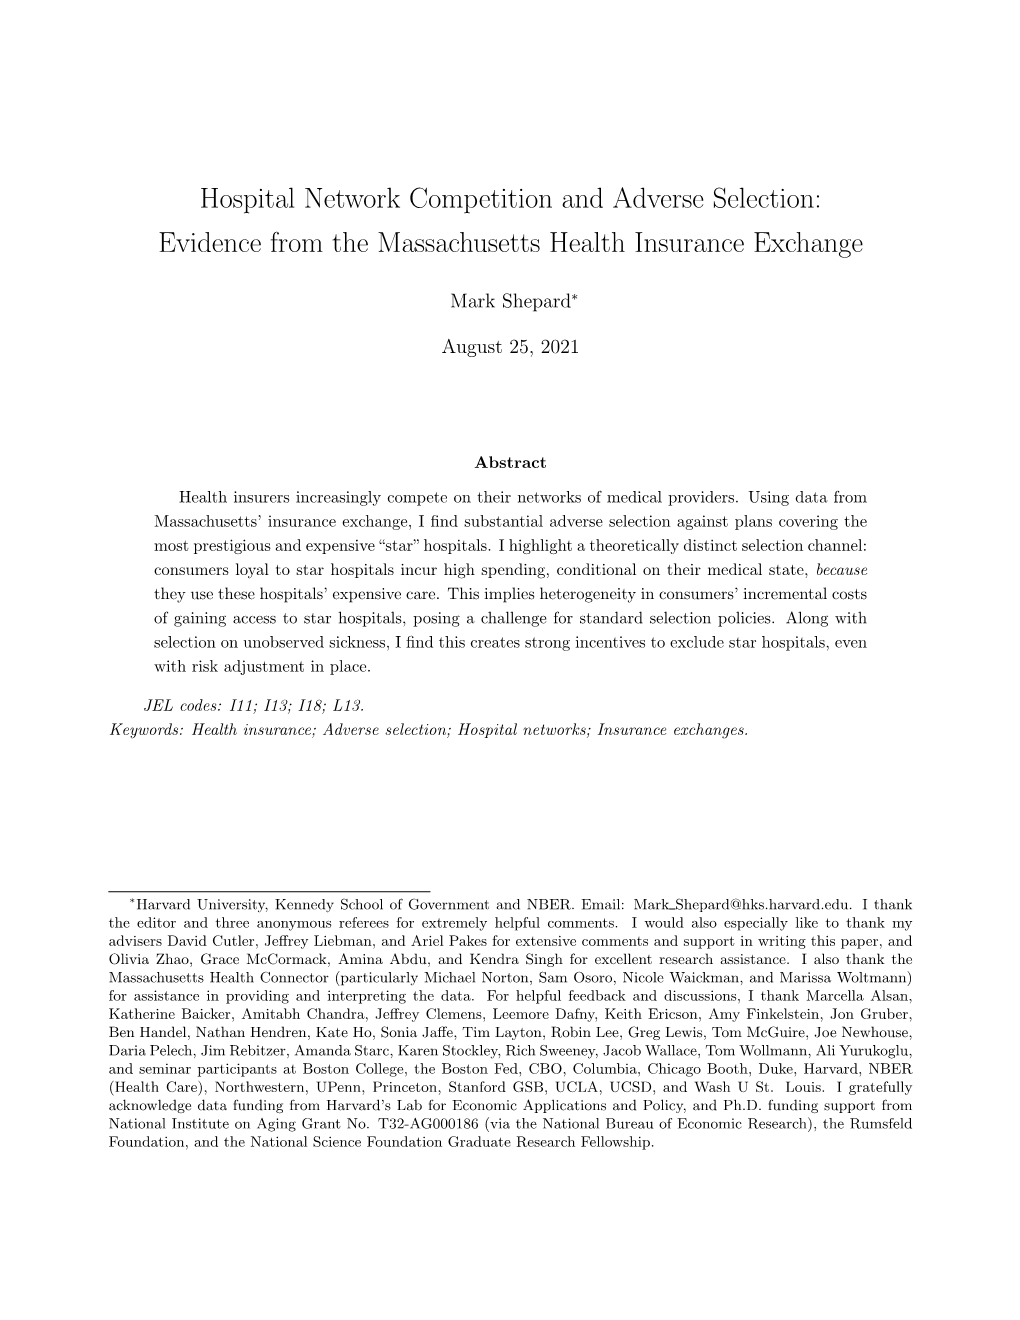 Hospital Network Competition and Adverse Selection: Evidence from the Massachusetts Health Insurance Exchange